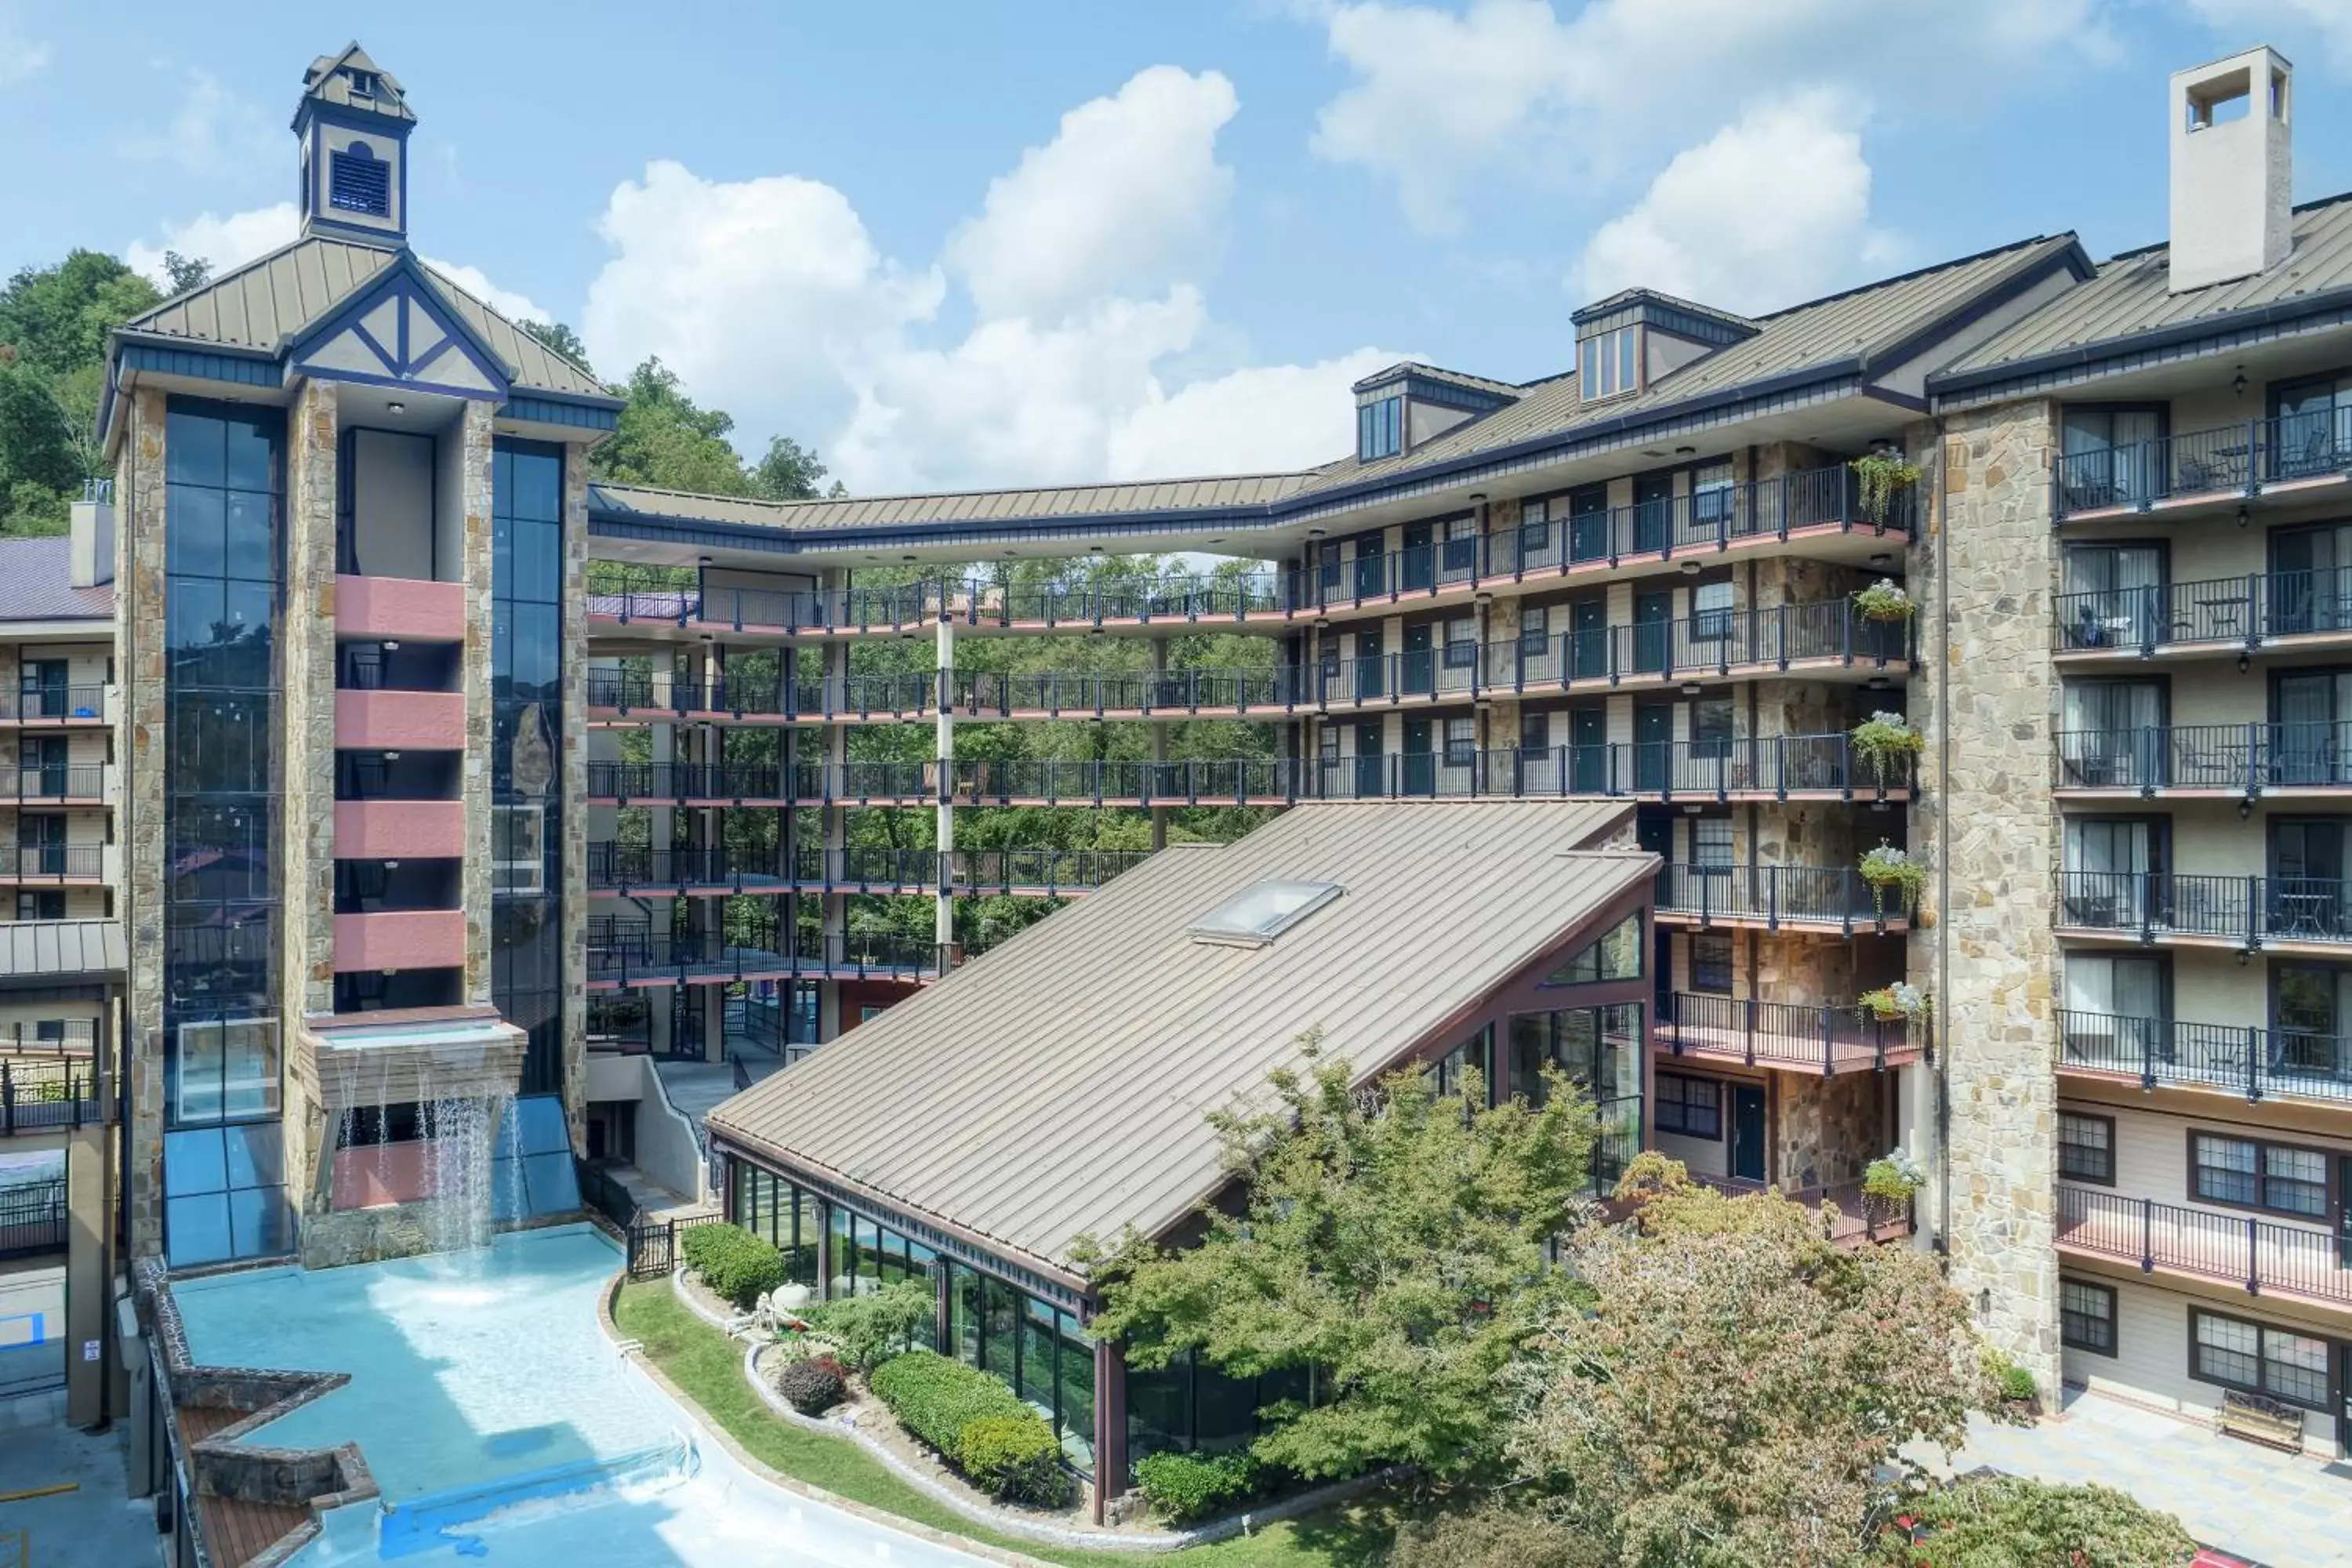 Property building in Gatlinburg Town Square by Exploria Resorts